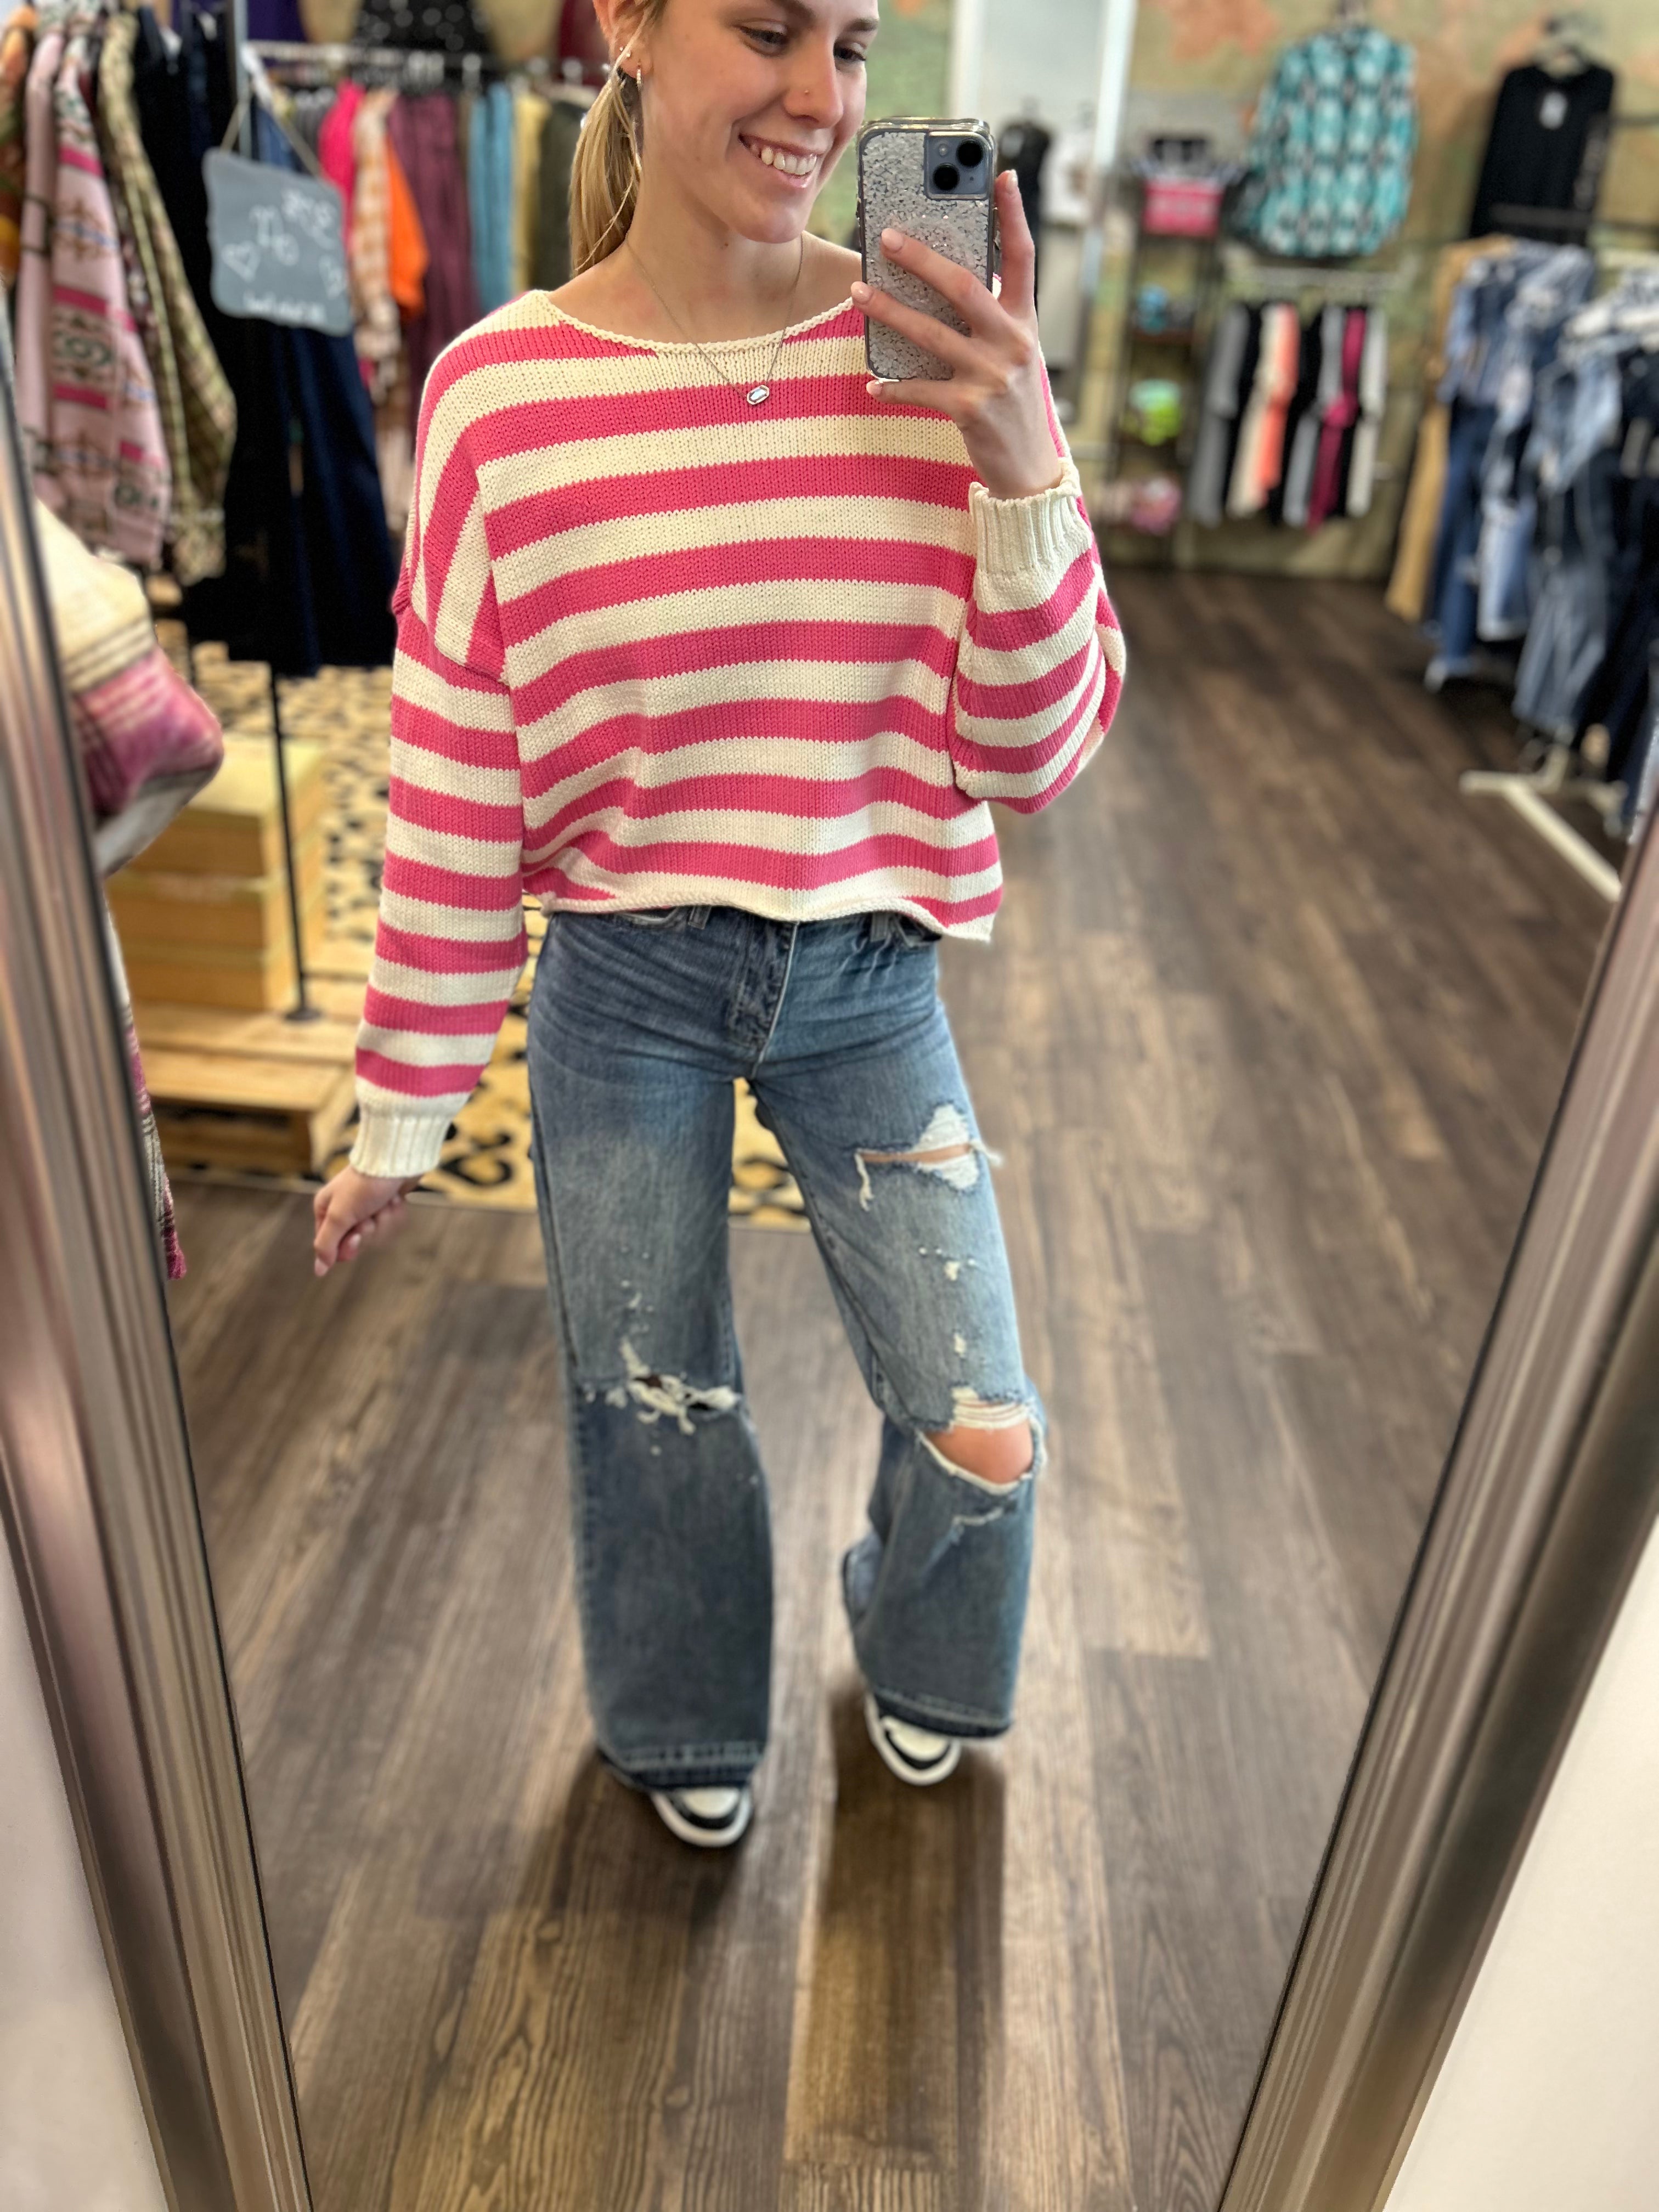 Striped Long Sleeve Knit Pullover Sweater Pink or Blue